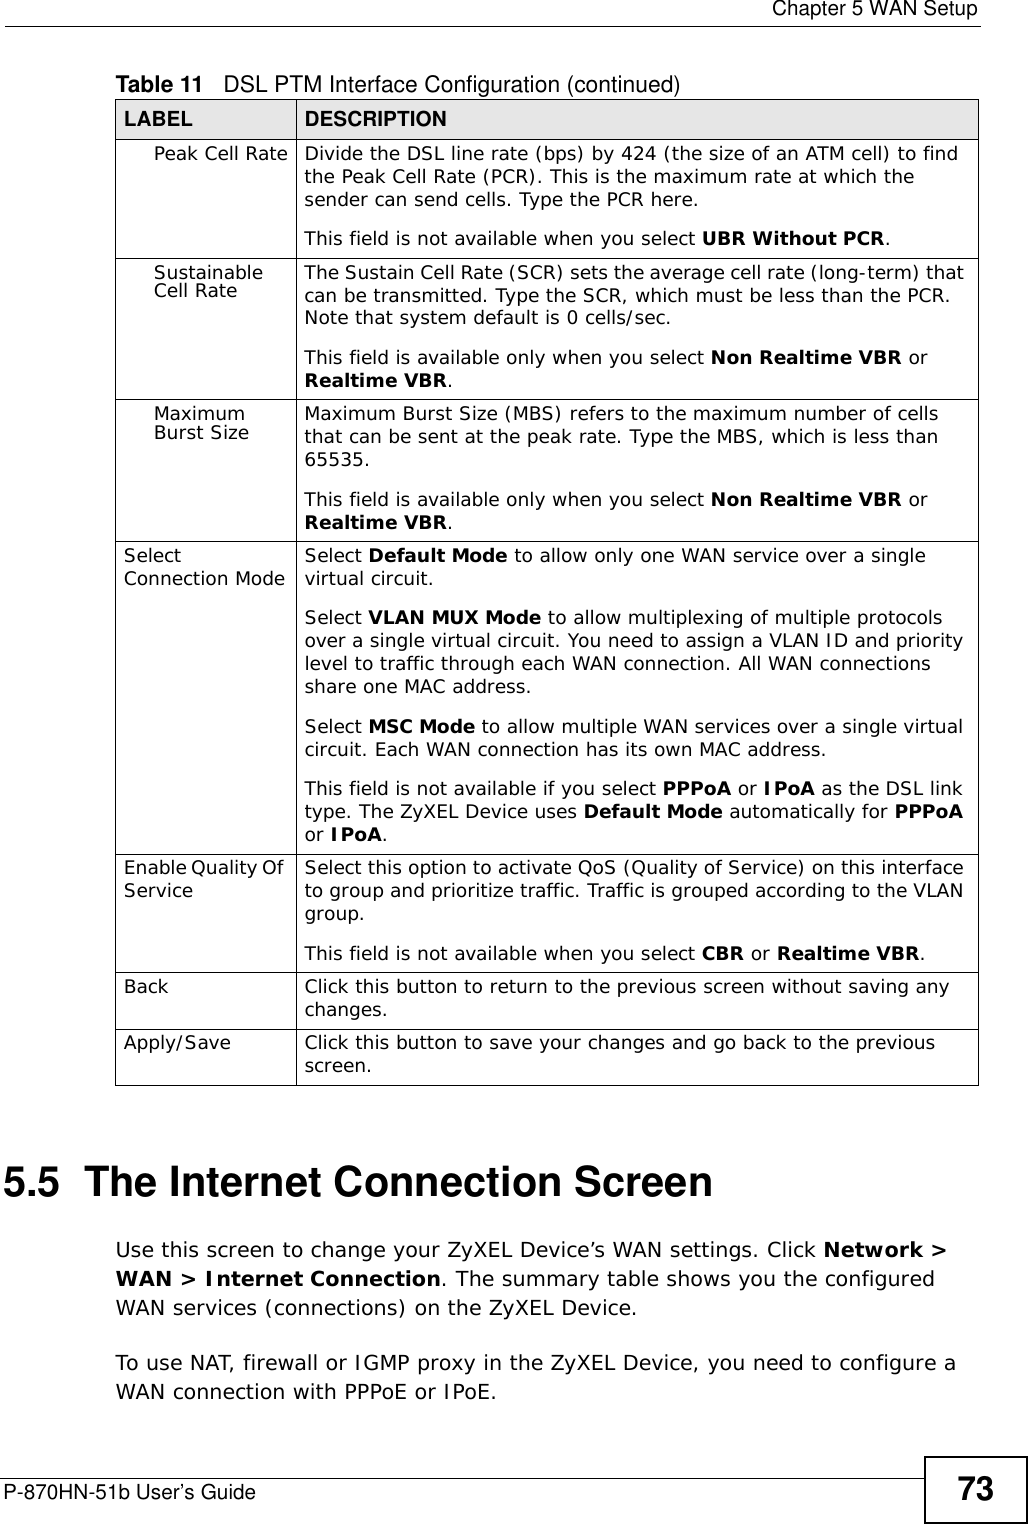  Chapter 5 WAN SetupP-870HN-51b User’s Guide 735.5  The Internet Connection Screen Use this screen to change your ZyXEL Device’s WAN settings. Click Network &gt; WAN &gt; Internet Connection. The summary table shows you the configured WAN services (connections) on the ZyXEL Device. To use NAT, firewall or IGMP proxy in the ZyXEL Device, you need to configure a WAN connection with PPPoE or IPoE.Peak Cell Rate Divide the DSL line rate (bps) by 424 (the size of an ATM cell) to find the Peak Cell Rate (PCR). This is the maximum rate at which the sender can send cells. Type the PCR here.This field is not available when you select UBR Without PCR.Sustainable Cell Rate The Sustain Cell Rate (SCR) sets the average cell rate (long-term) that can be transmitted. Type the SCR, which must be less than the PCR. Note that system default is 0 cells/sec. This field is available only when you select Non Realtime VBR or Realtime VBR.Maximum Burst Size Maximum Burst Size (MBS) refers to the maximum number of cells that can be sent at the peak rate. Type the MBS, which is less than 65535. This field is available only when you select Non Realtime VBR or Realtime VBR.Select Connection Mode Select Default Mode to allow only one WAN service over a single virtual circuit.Select VLAN MUX Mode to allow multiplexing of multiple protocols over a single virtual circuit. You need to assign a VLAN ID and priority level to traffic through each WAN connection. All WAN connections share one MAC address.Select MSC Mode to allow multiple WAN services over a single virtual circuit. Each WAN connection has its own MAC address.This field is not available if you select PPPoA or IPoA as the DSL link type. The ZyXEL Device uses Default Mode automatically for PPPoA or IPoA.Enable Quality Of Service Select this option to activate QoS (Quality of Service) on this interface to group and prioritize traffic. Traffic is grouped according to the VLAN group.This field is not available when you select CBR or Realtime VBR.Back Click this button to return to the previous screen without saving any changes.Apply/Save Click this button to save your changes and go back to the previous screen.Table 11   DSL PTM Interface Configuration (continued)LABEL DESCRIPTION